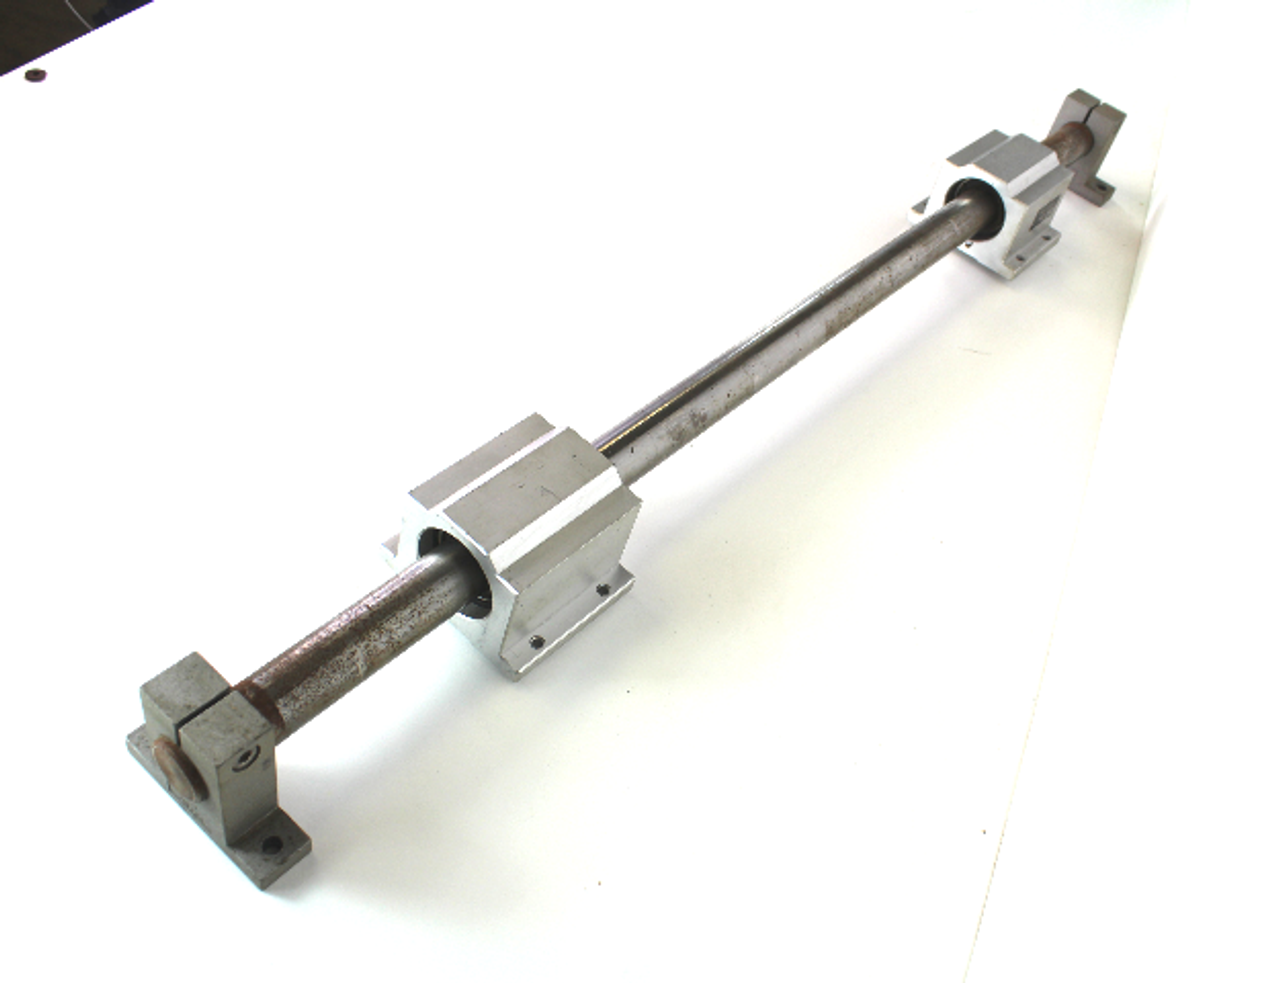 NB Linear Systems WH20A 1-1/4" Shaft Supporter for Linear Actuator w/ SWA20 1-1/4" Ball Bushing Block